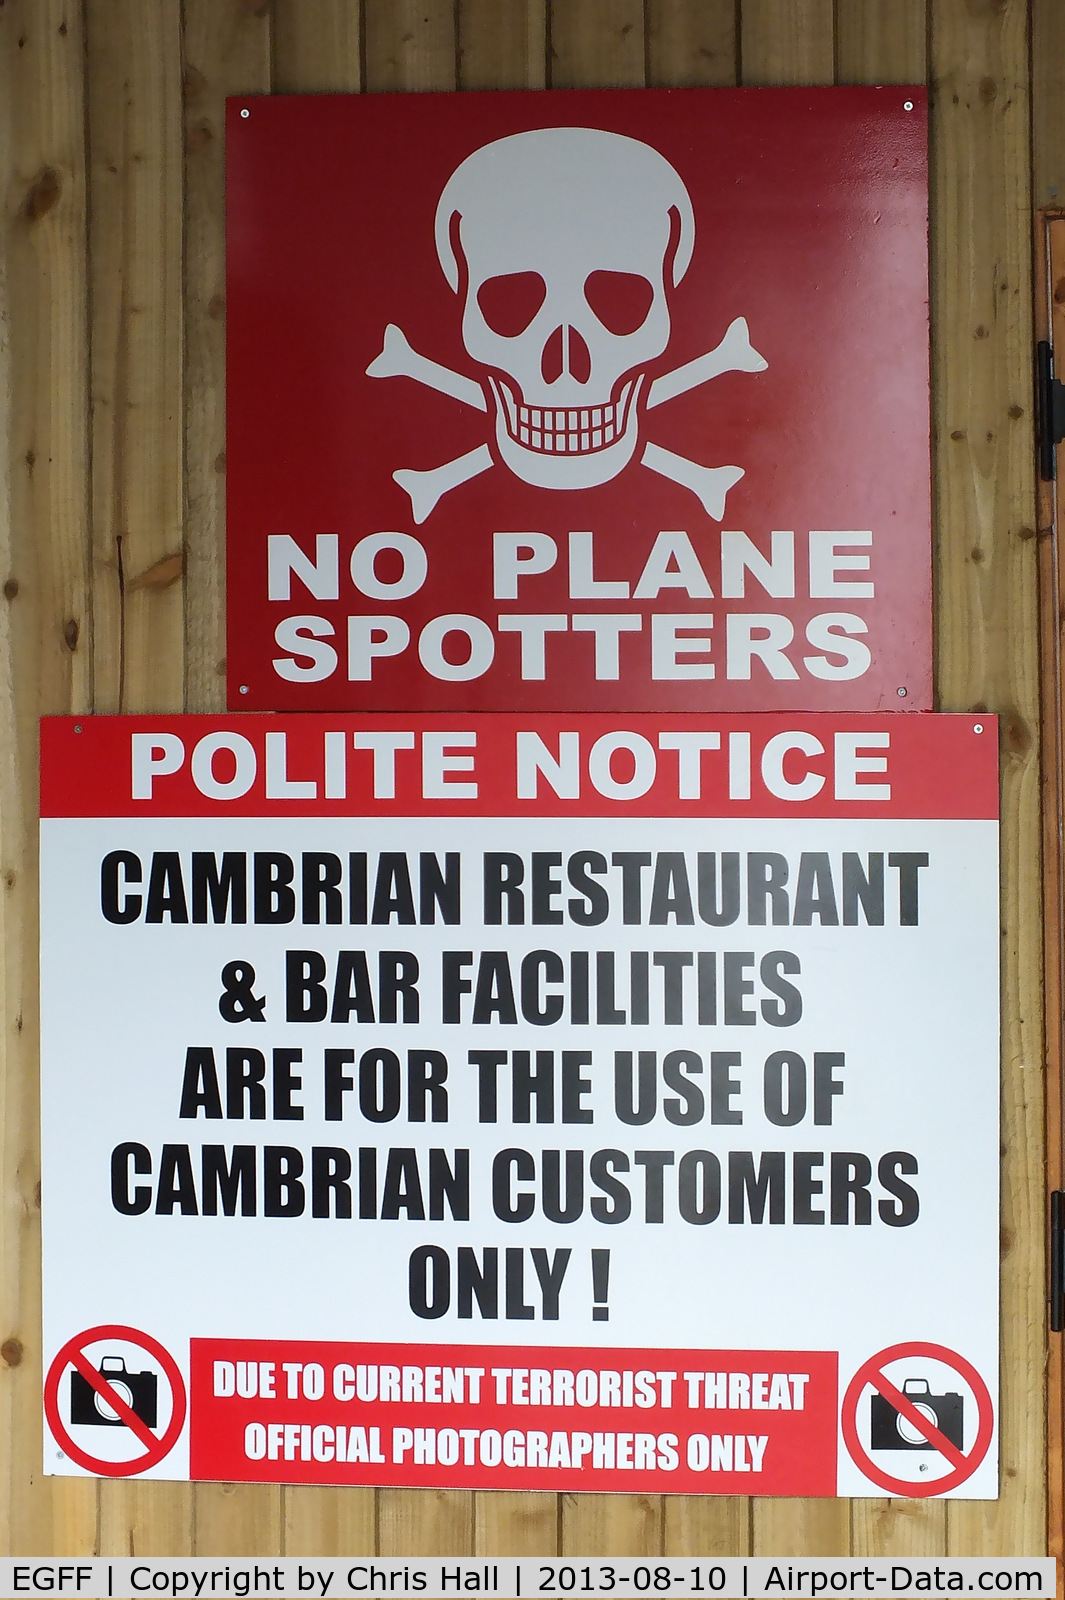 Cardiff International Airport, Cardiff, Wales United Kingdom (EGFF) - Warning No Spotters...Ignore the sign, you will be made welcome if you buy some food and a drink and have a great view across the airfield from their balcony